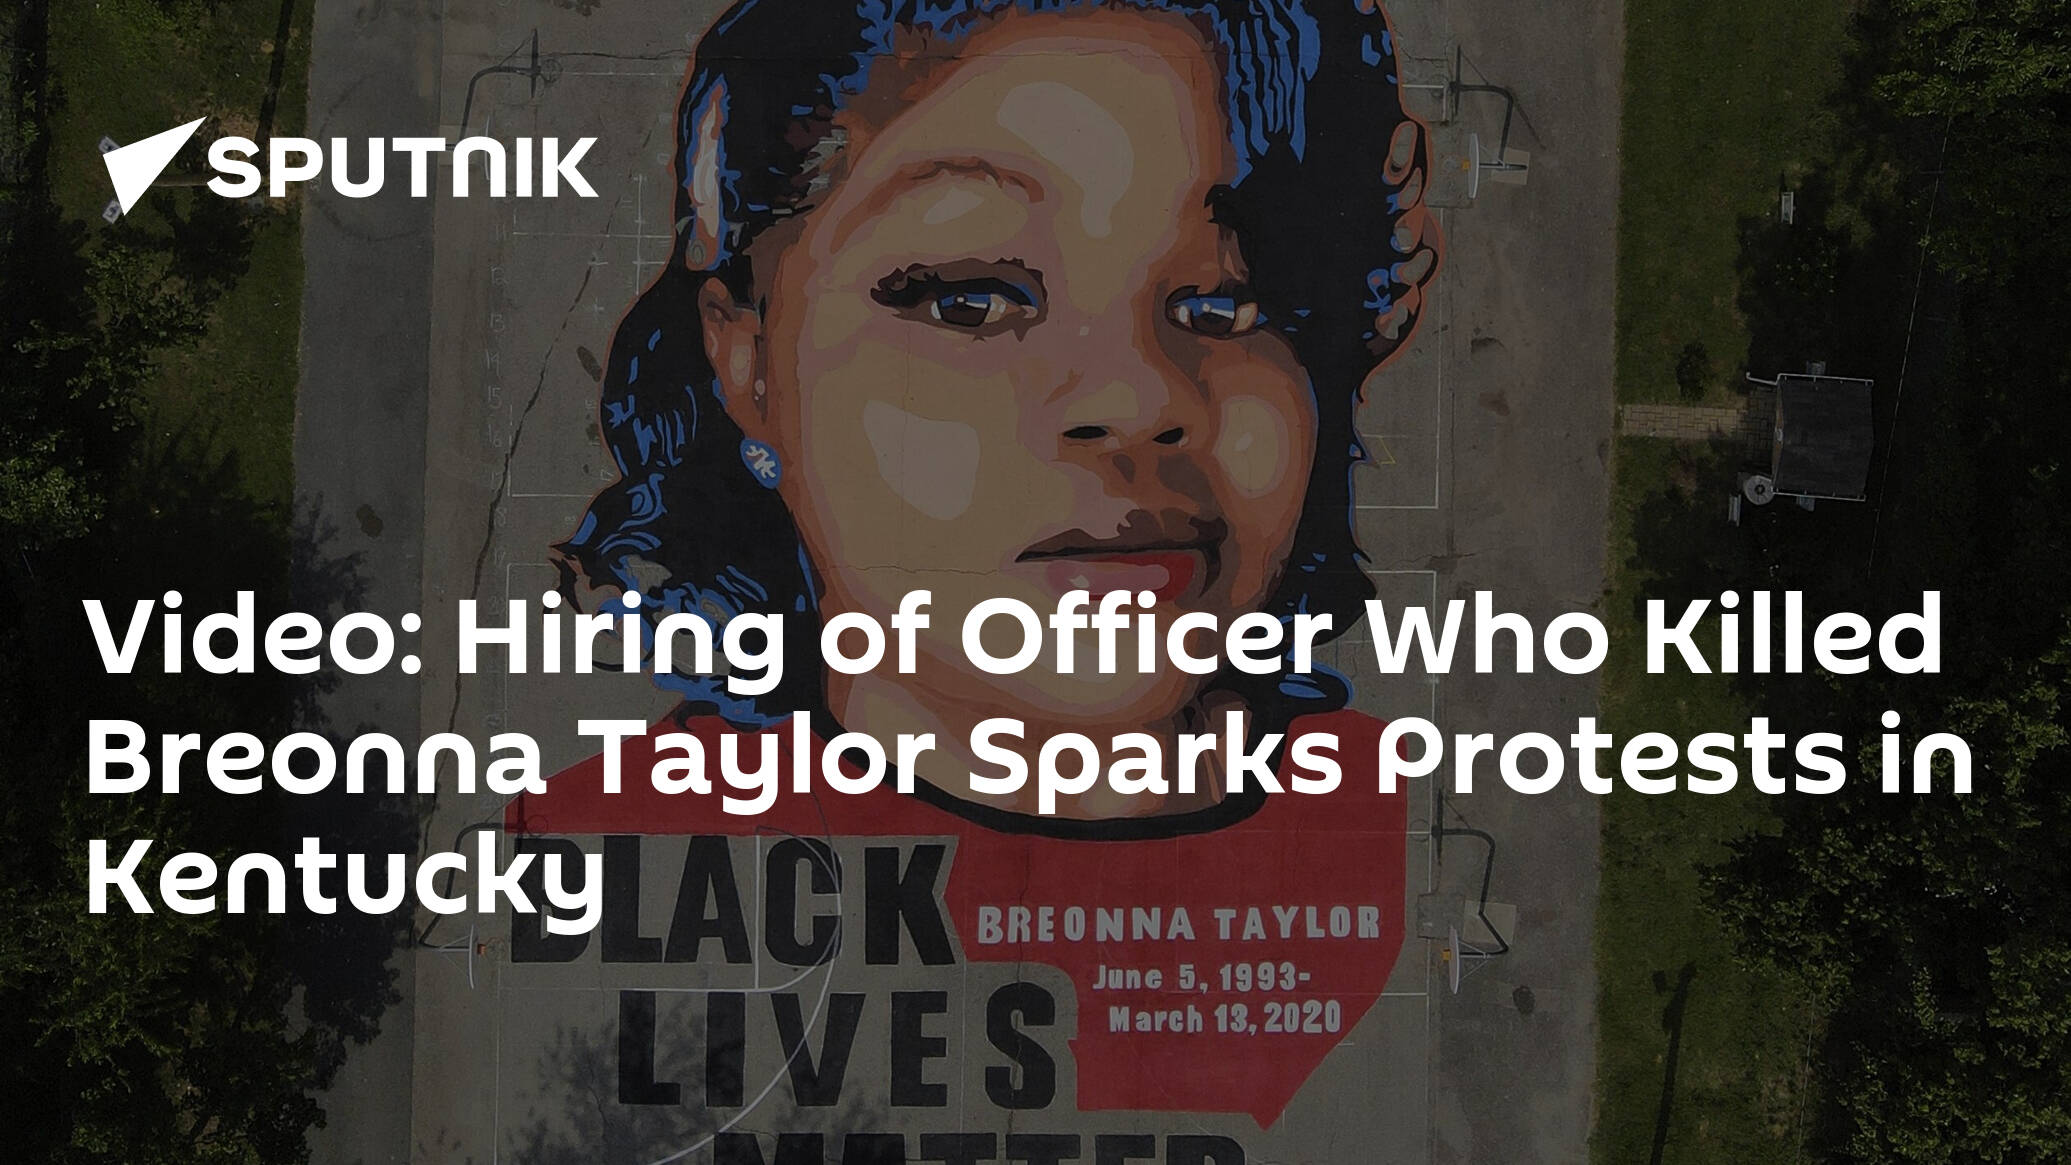 Video: Hiring of Officer Who Killed Breonna Taylor Sparks Protests in Kentucky